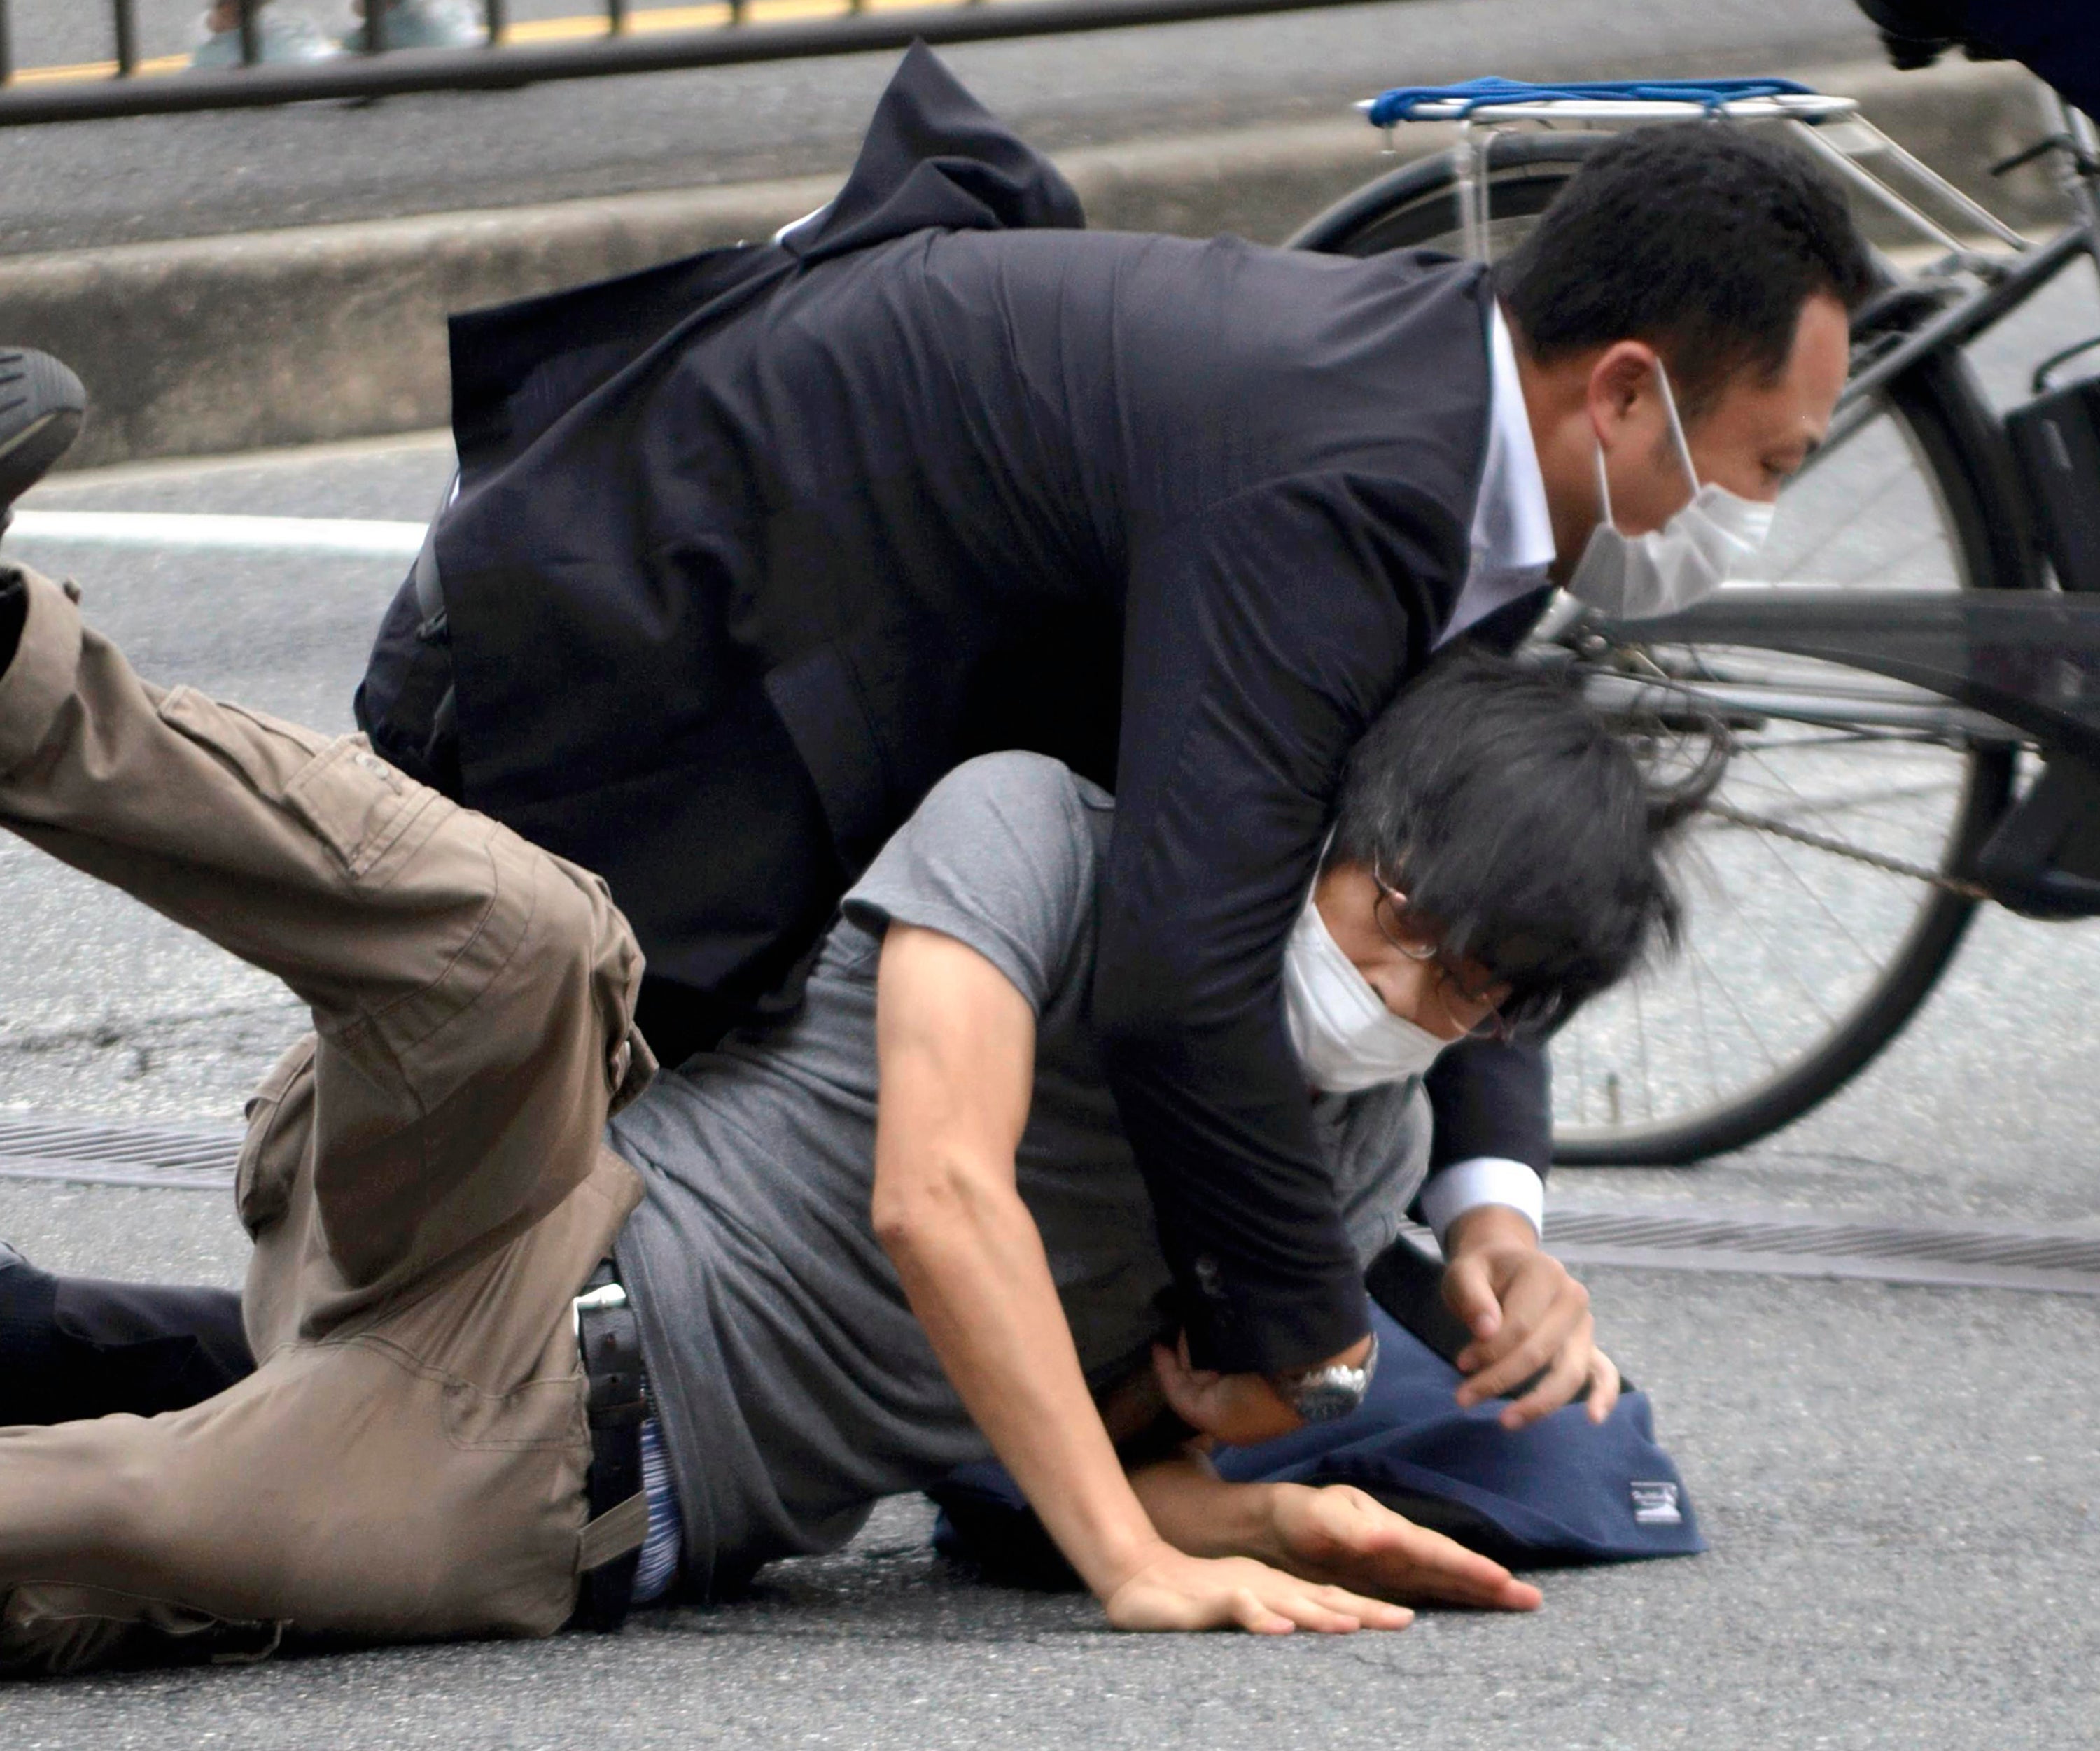 File photo: Tetsuya Yamagami is detained near the site of gunshots in Nara Prefecture in western Japan on 8 July 2022. Japanese prosecutors formally charged the suspect in the assassination of former prime minister Shinzo Abe with murder, Japan’s NHK public television reported Friday, 13 January 2023